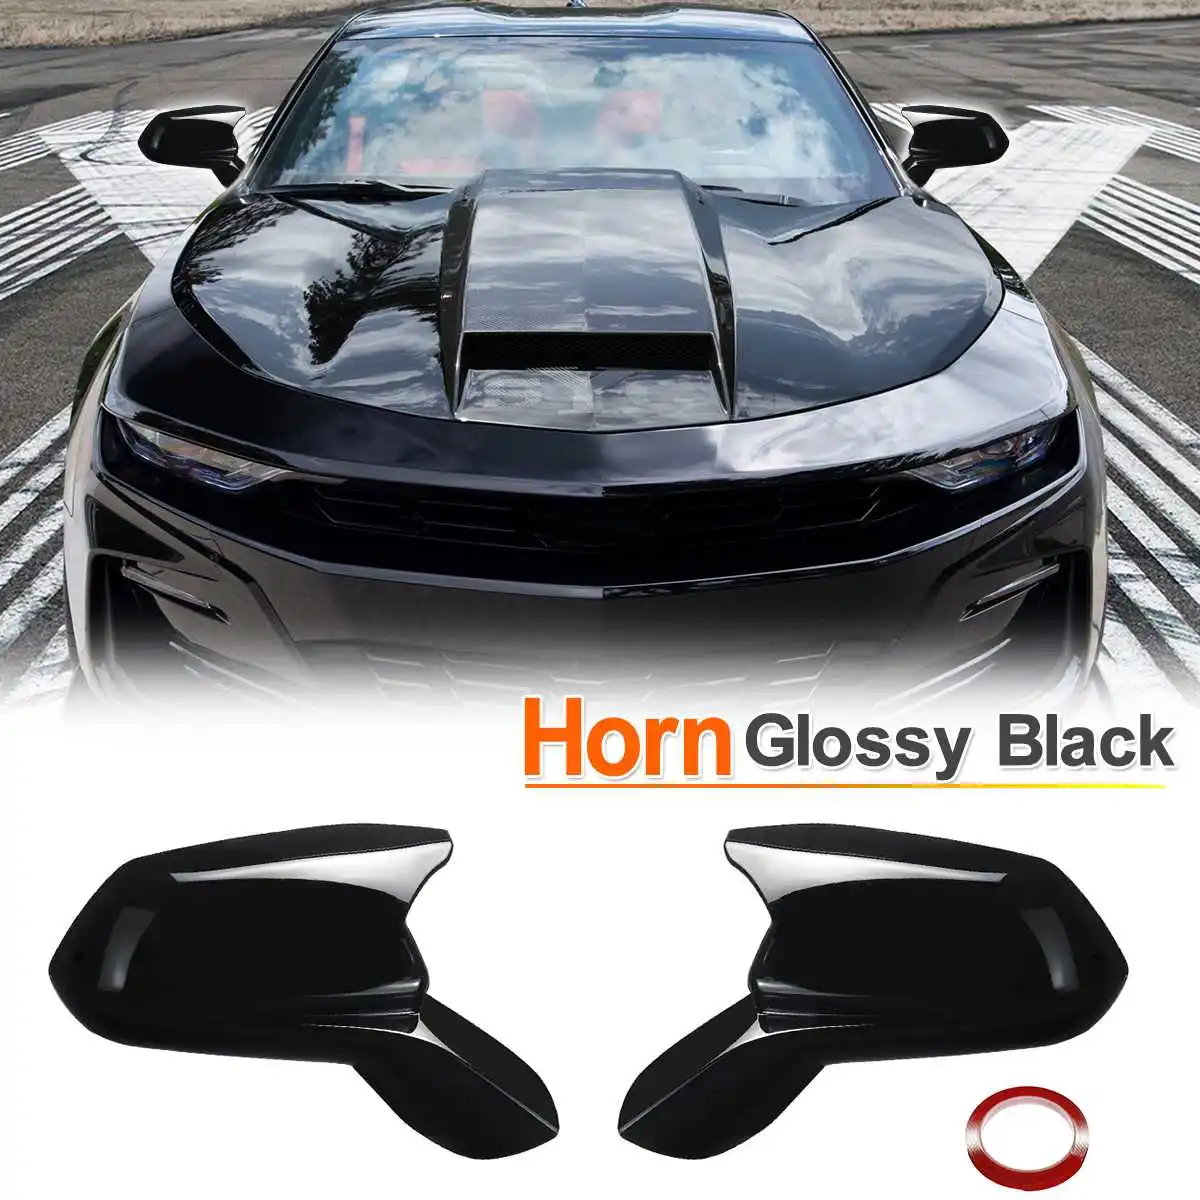 1pair glossy black horn style rearview side mirror cover caps for chevy camaro ss rs zl1 lt 2016 2021 free global shipping